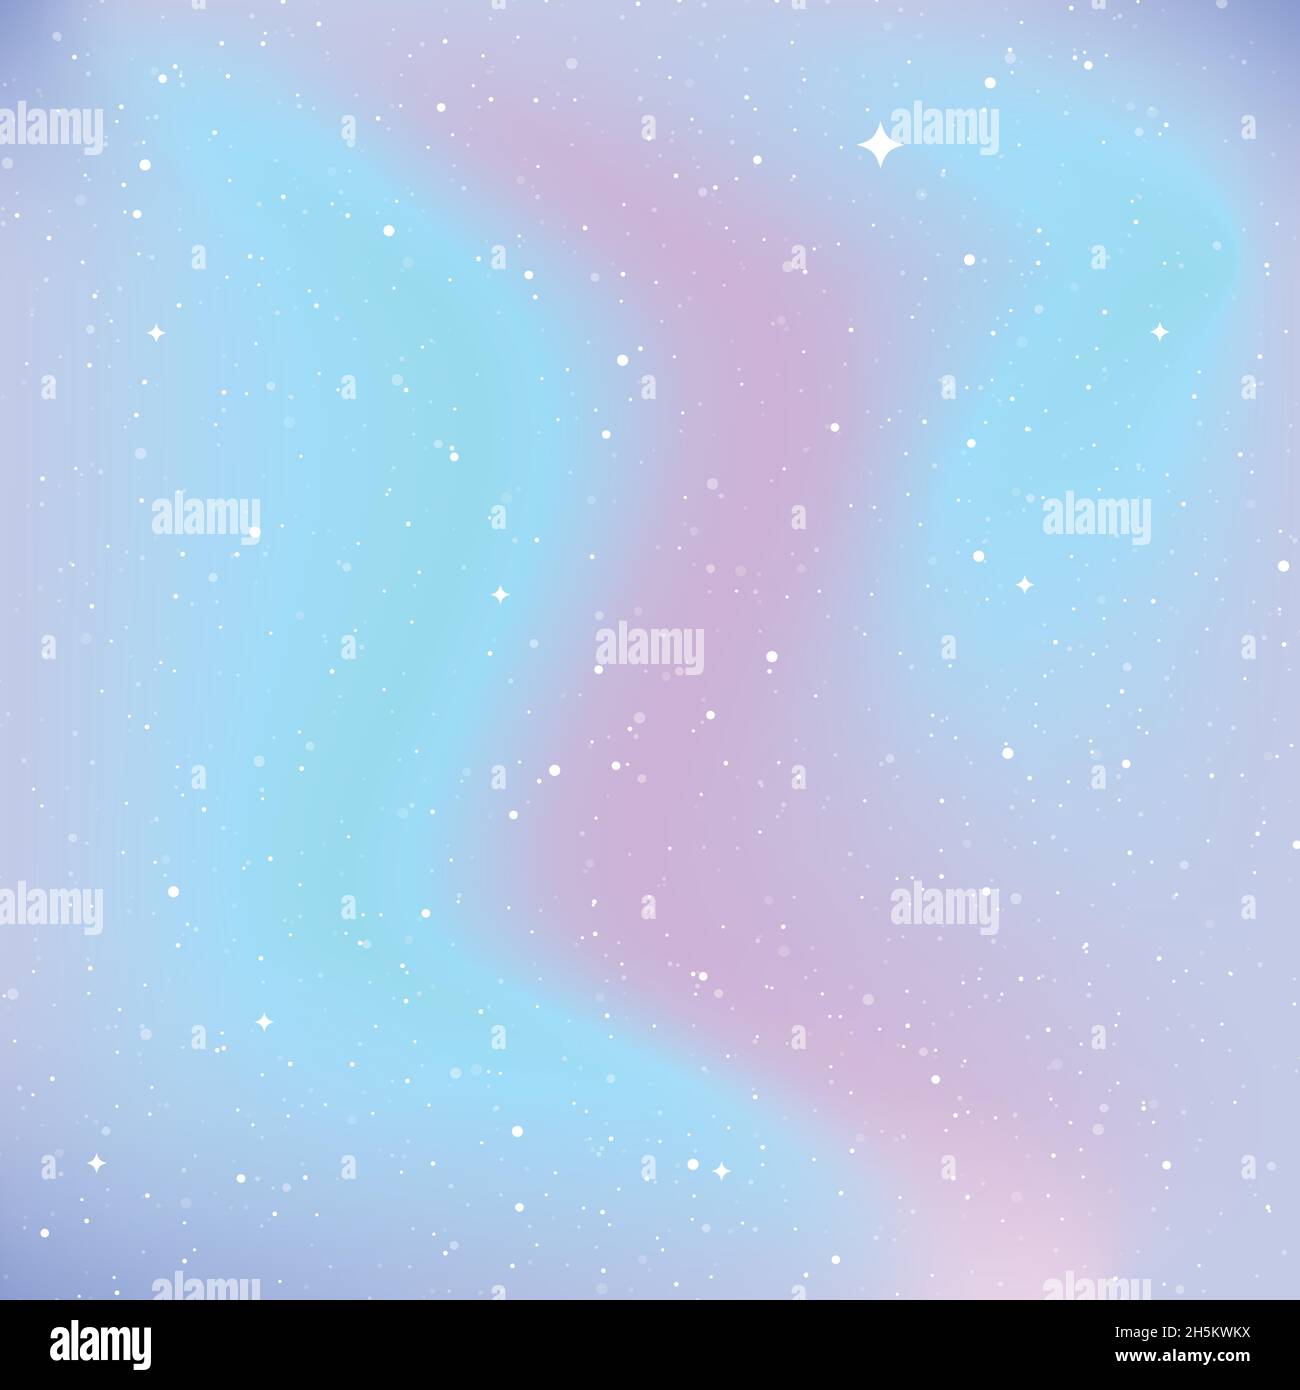 Star universe background. Pastel colour. Concept of galaxy, space, cosmos, space dust. Vector illustration Stock Vector